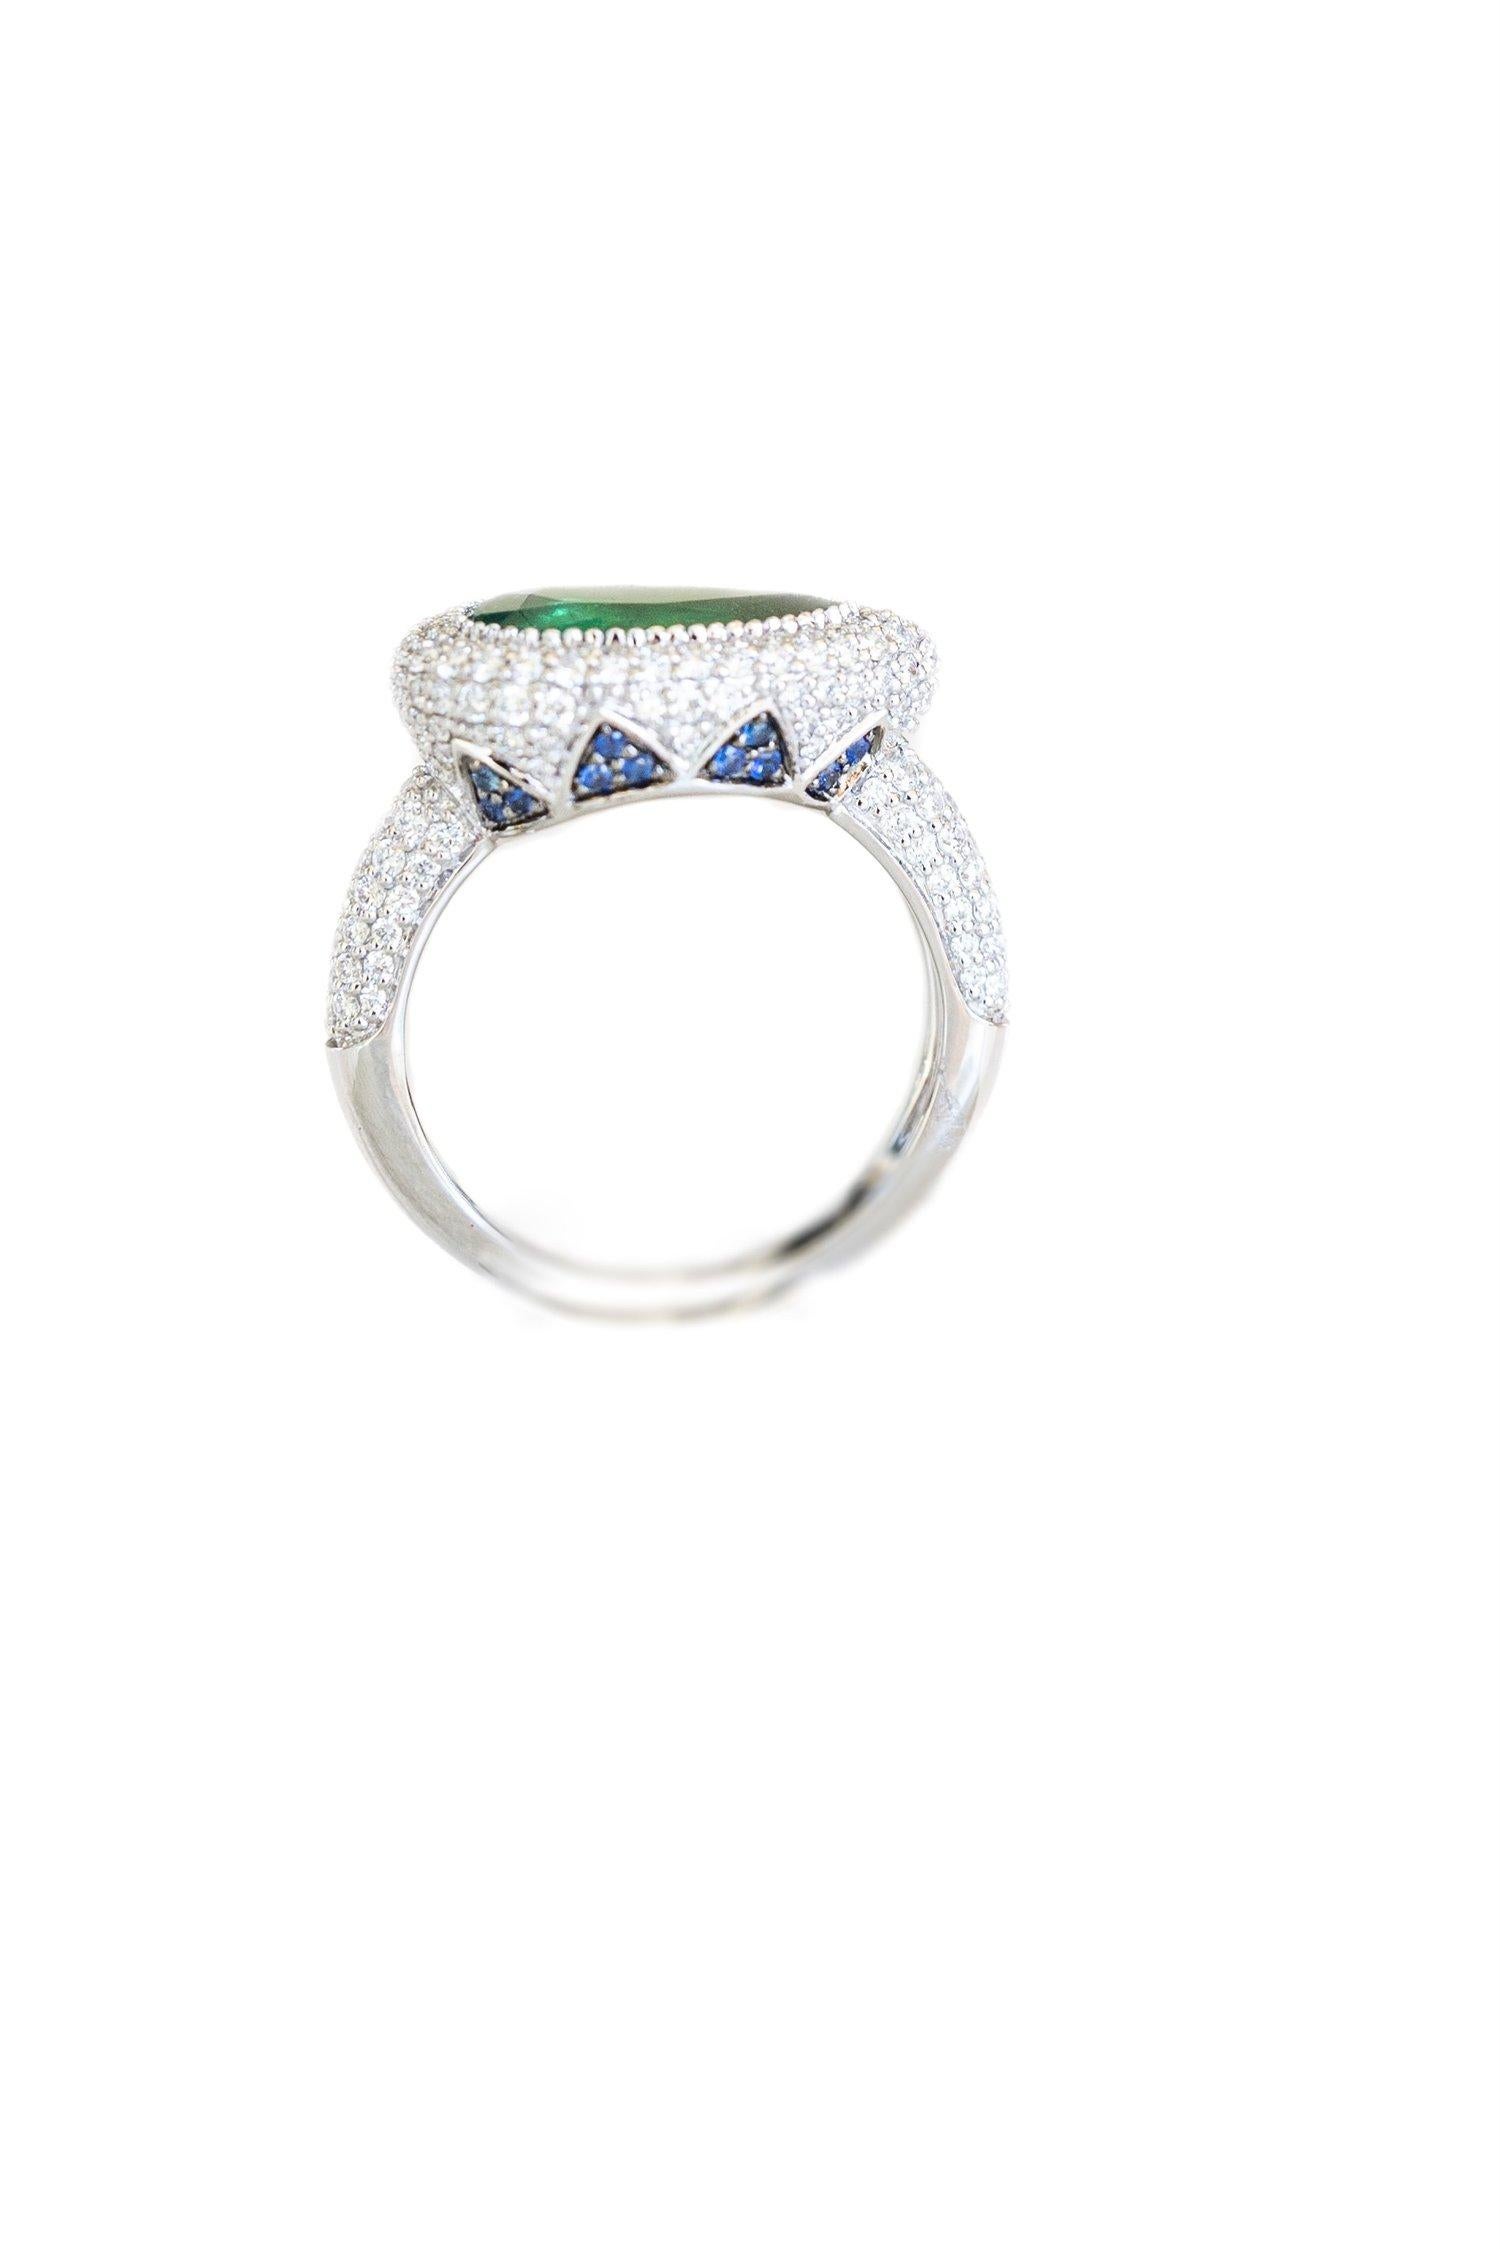 18k White Gold. These any-finger rings include a dazzling pear shaped emerald solitaire of approximately 2.25 cts, pave set blue sapphire petals in a lotus motif and pave set brilliant cut white diamonds. Rinoor's re-imagined rings, are incredibly